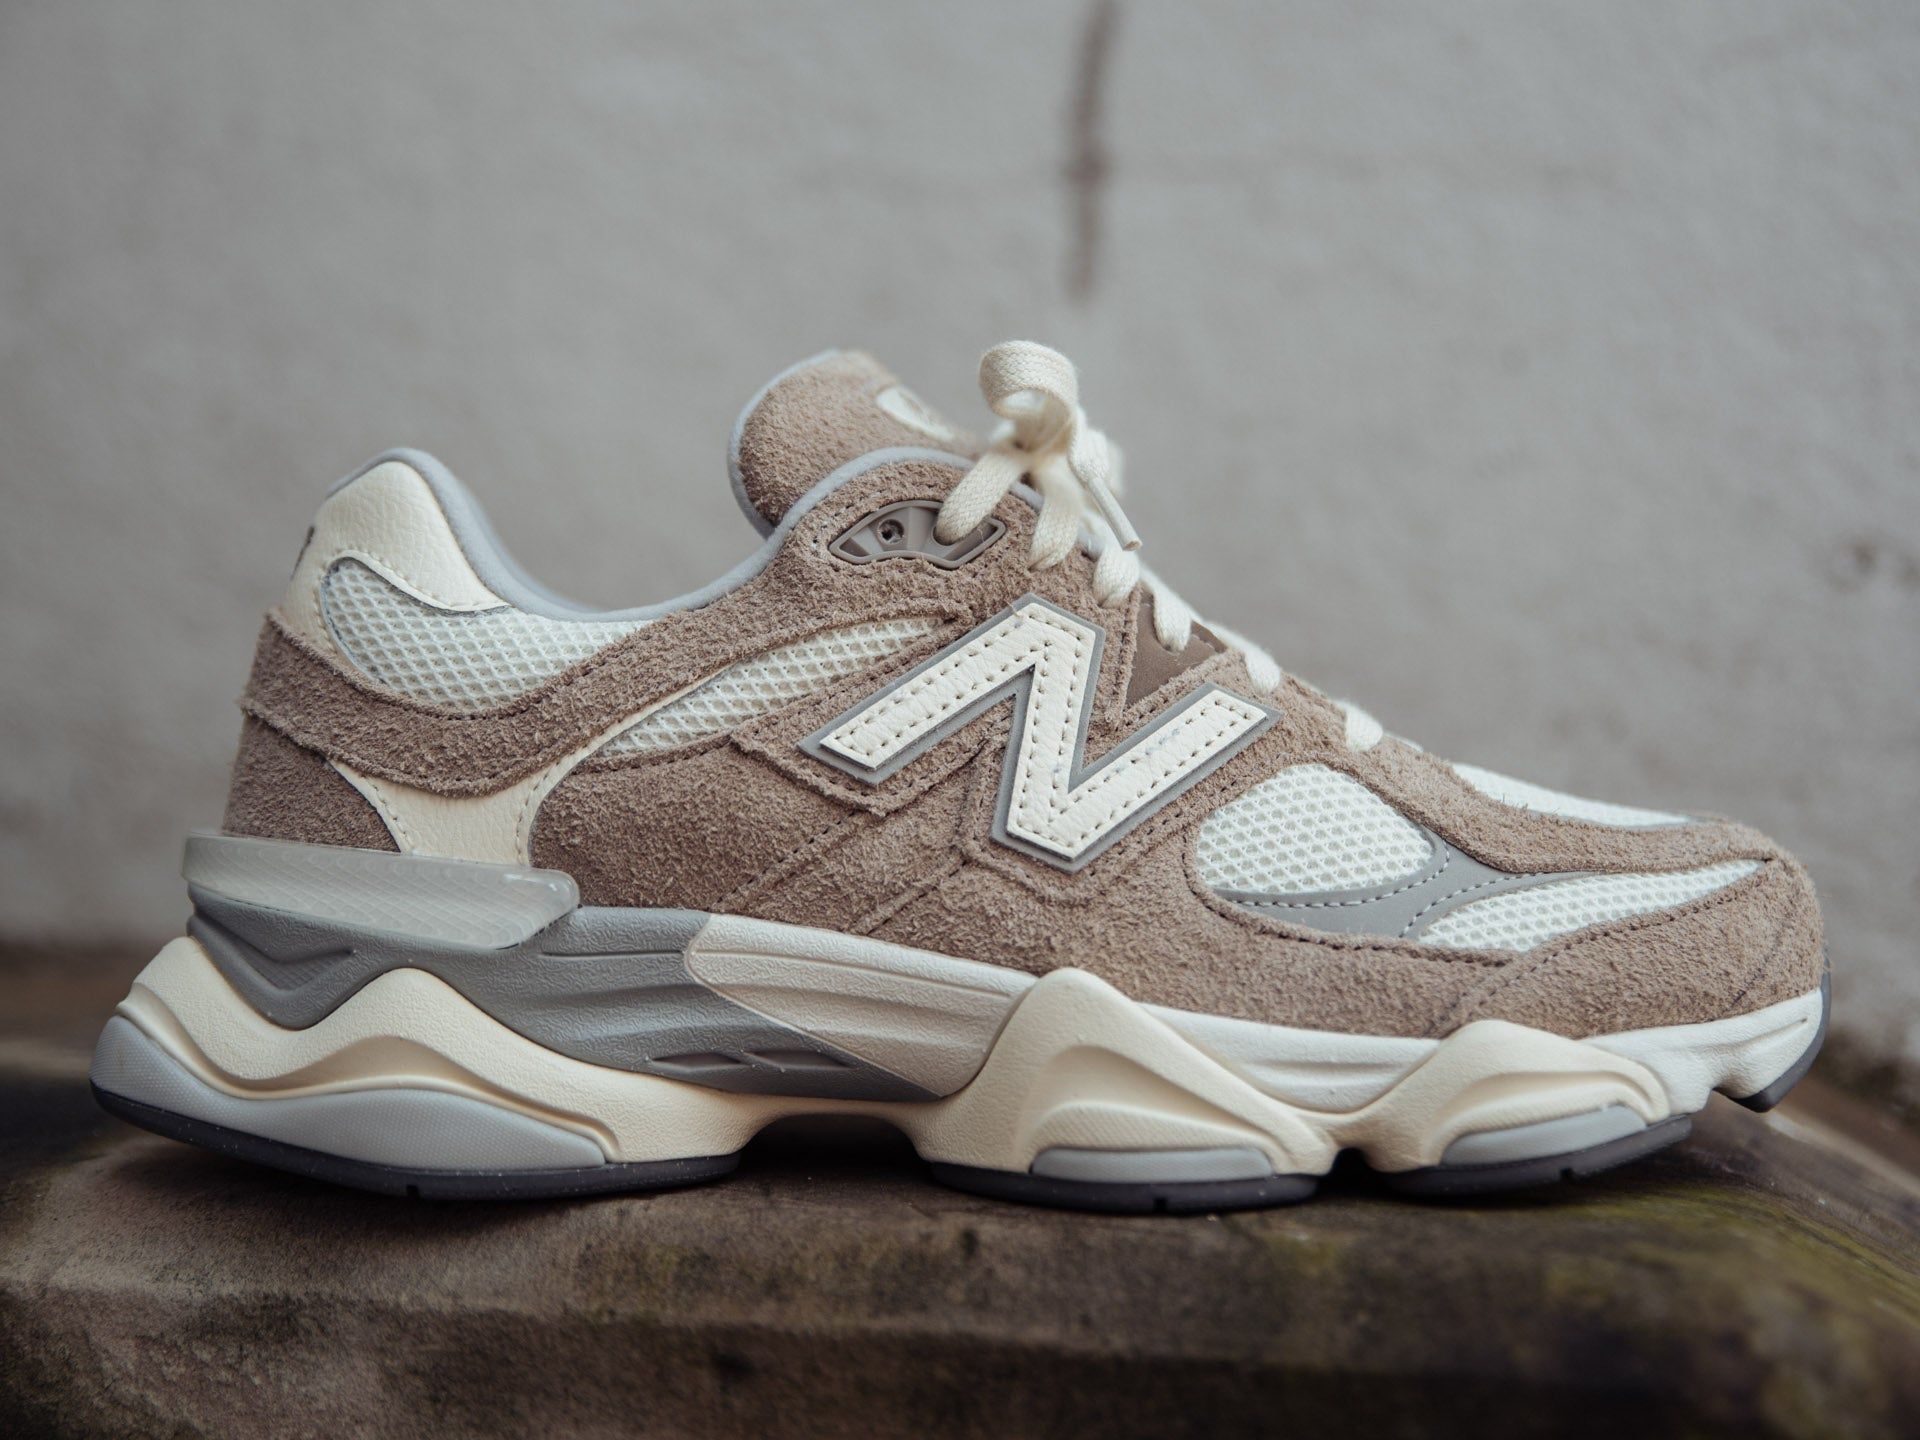 A pair of New Balance 2002R sneakers in a beige colorway. - New Balance